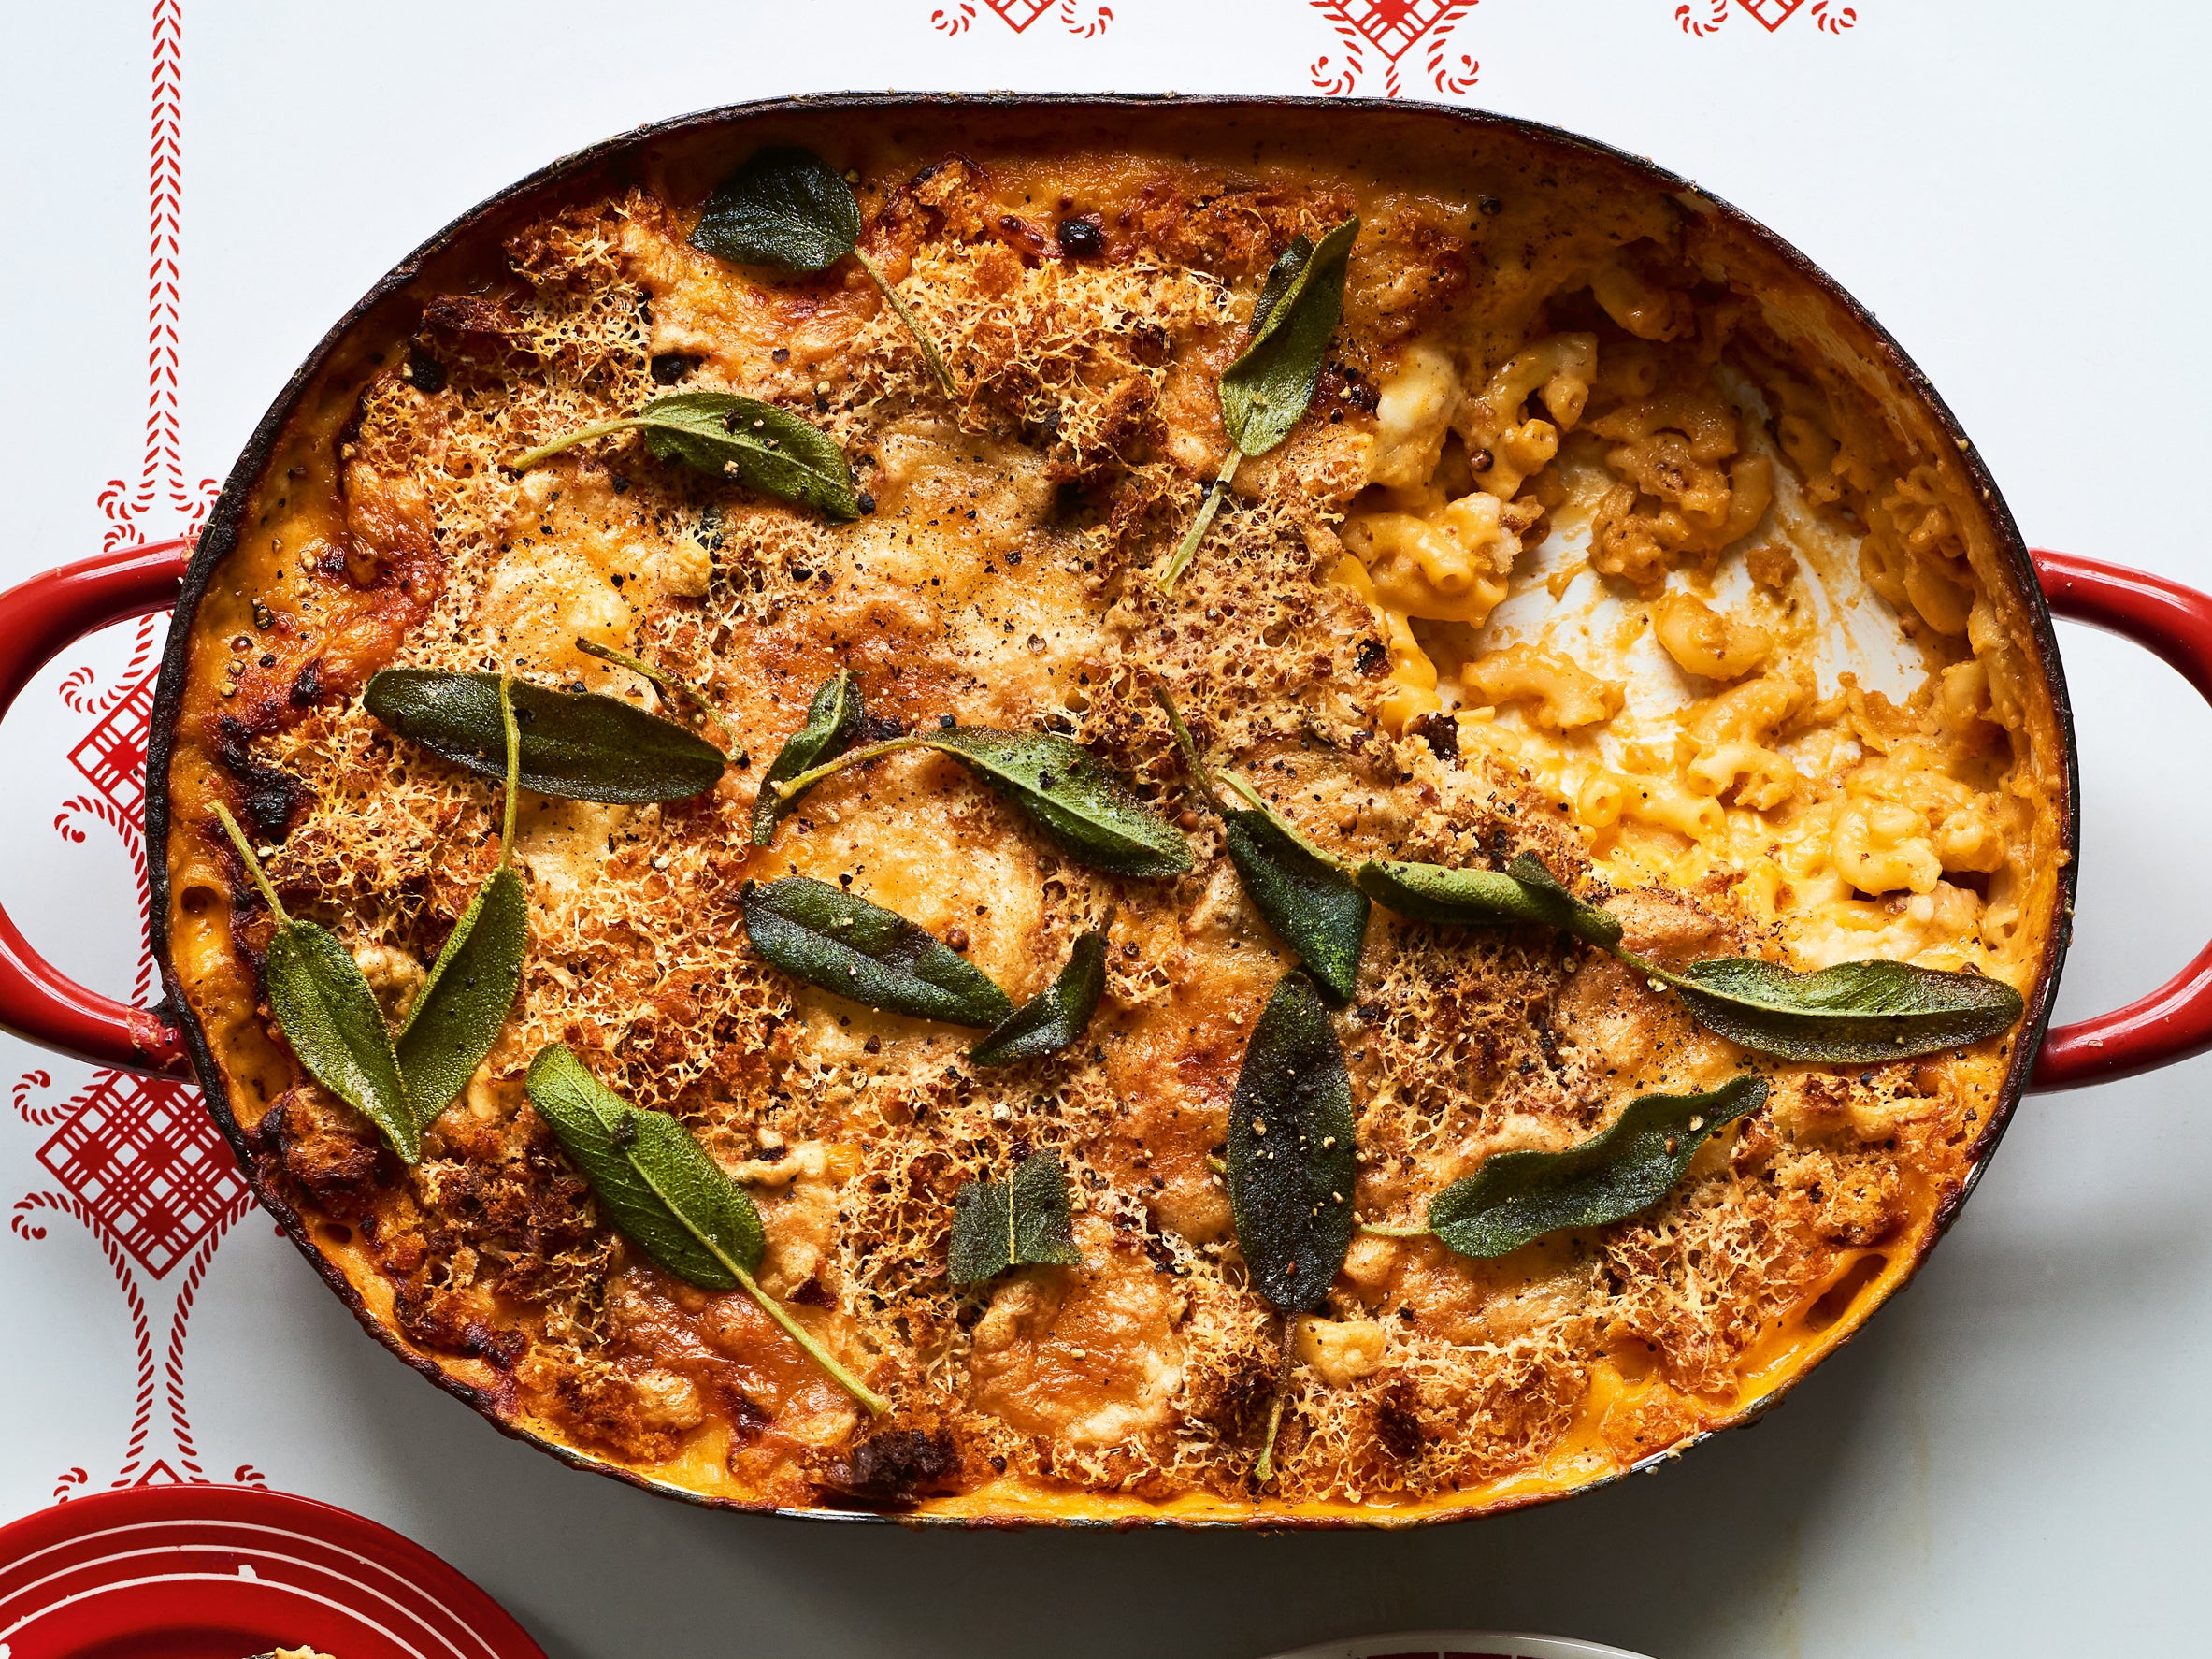 This hearty mac and cheese is great for when you’ve got a lot of mouths to feed